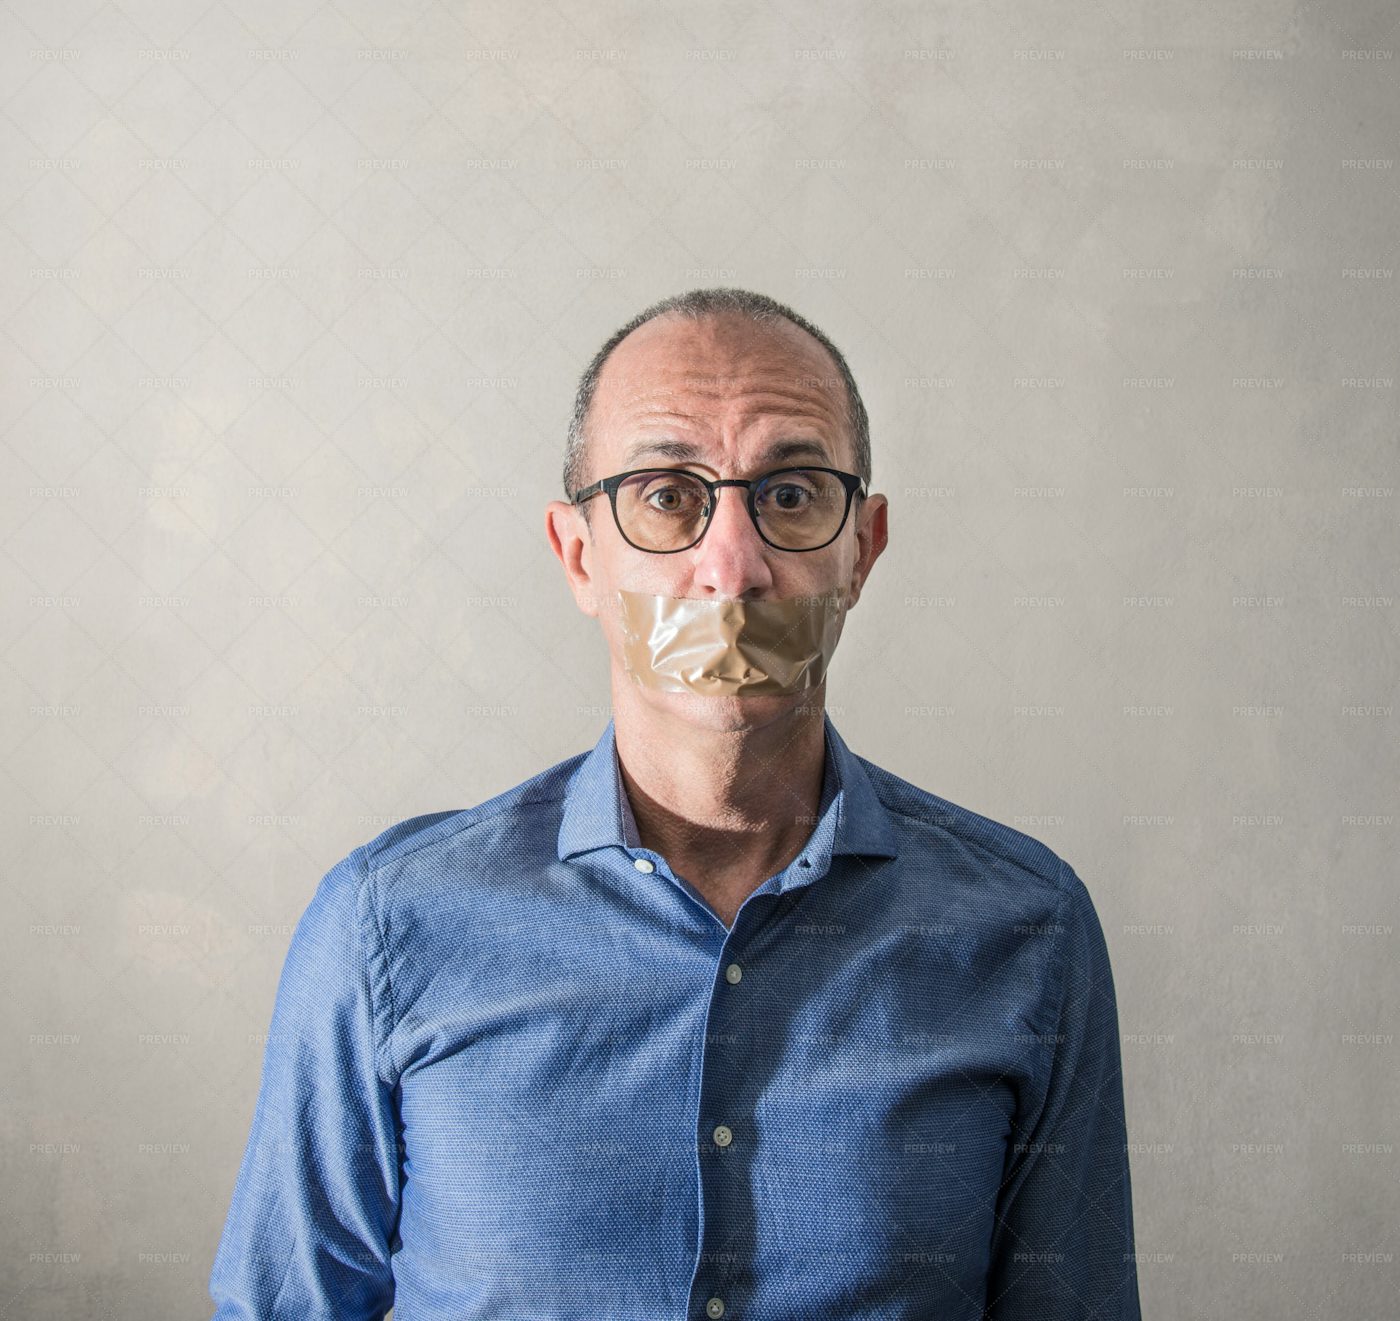 Duct Tape On Mouth: Stock Photos